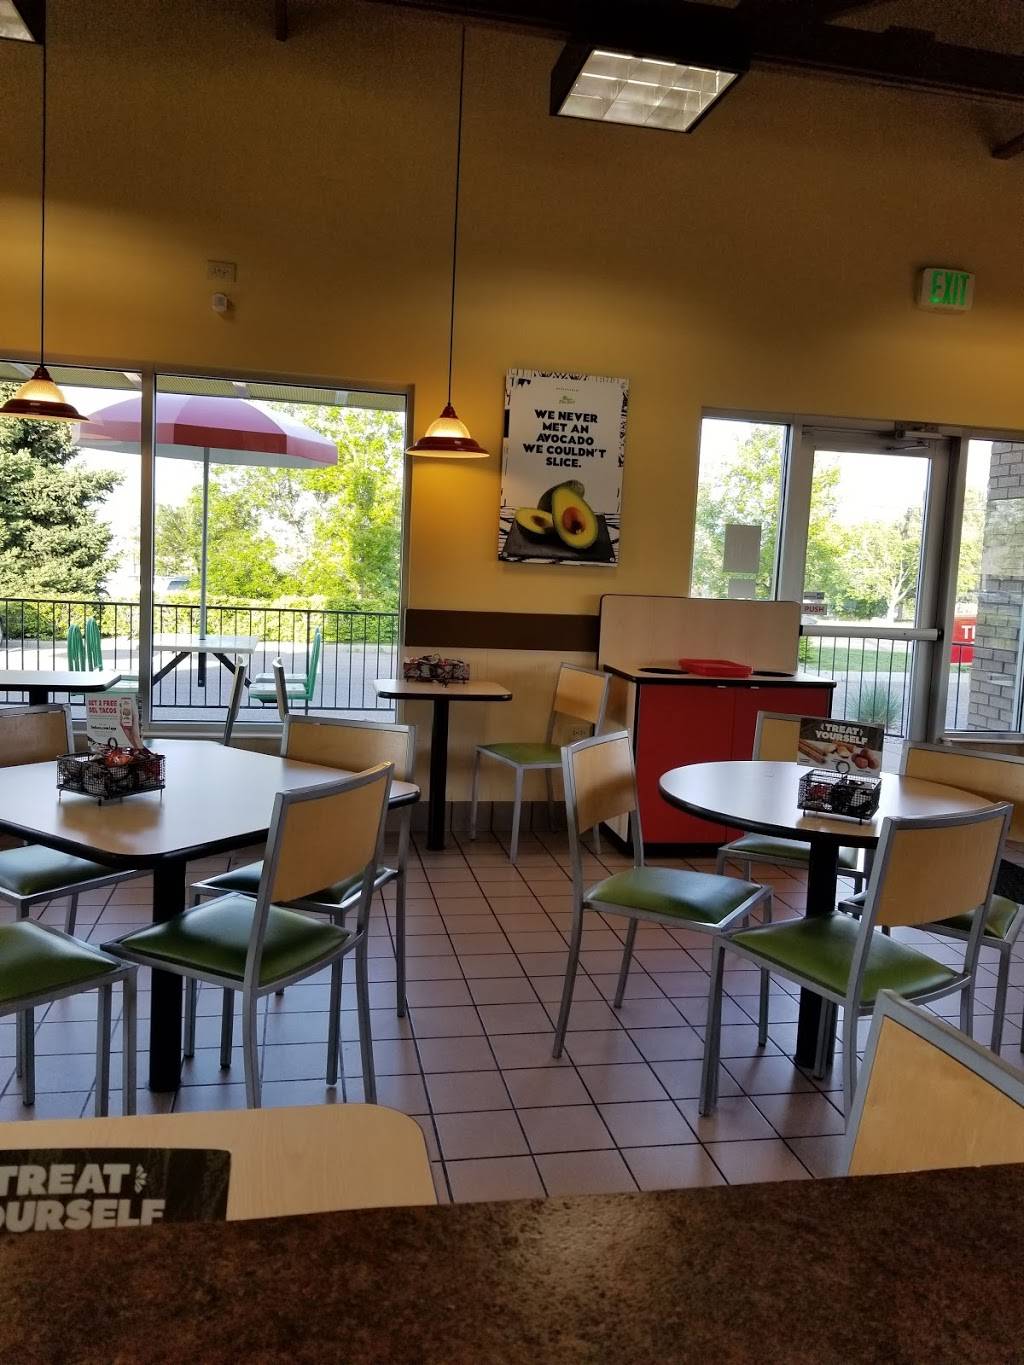 Del Taco - Meal takeaway | 2913 S 23rd Ave, Greeley, CO 80631, USA1024 x 1365